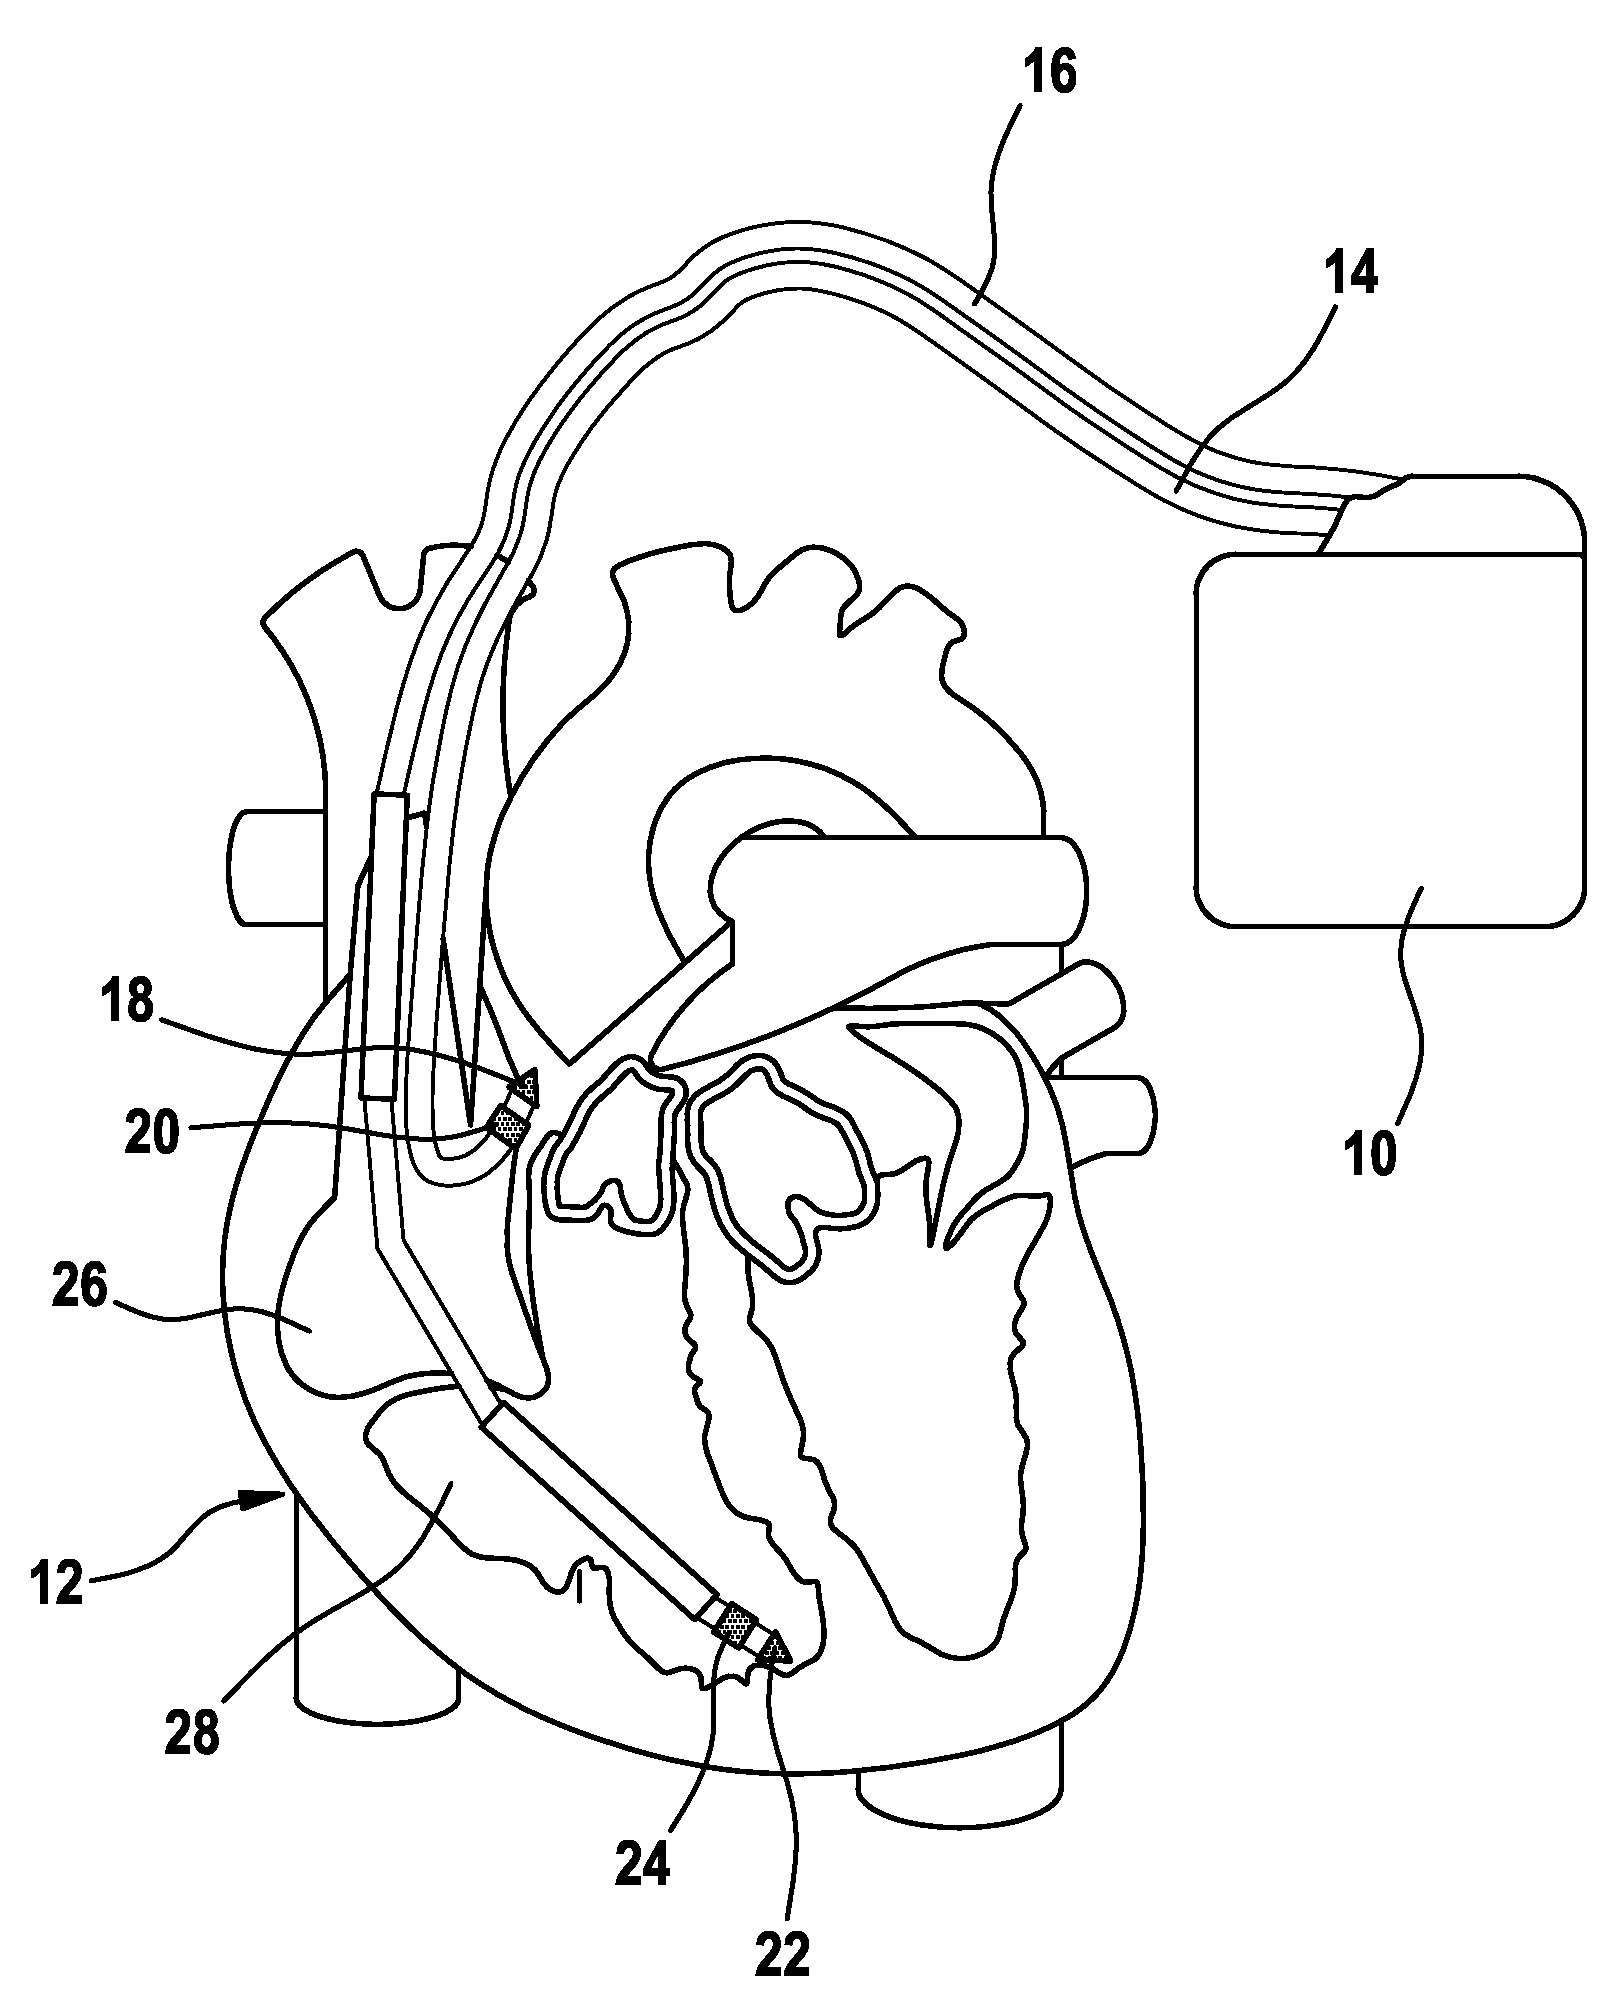 System and method of using regression models to estimate vulnerable periods for heart stimulation parameters